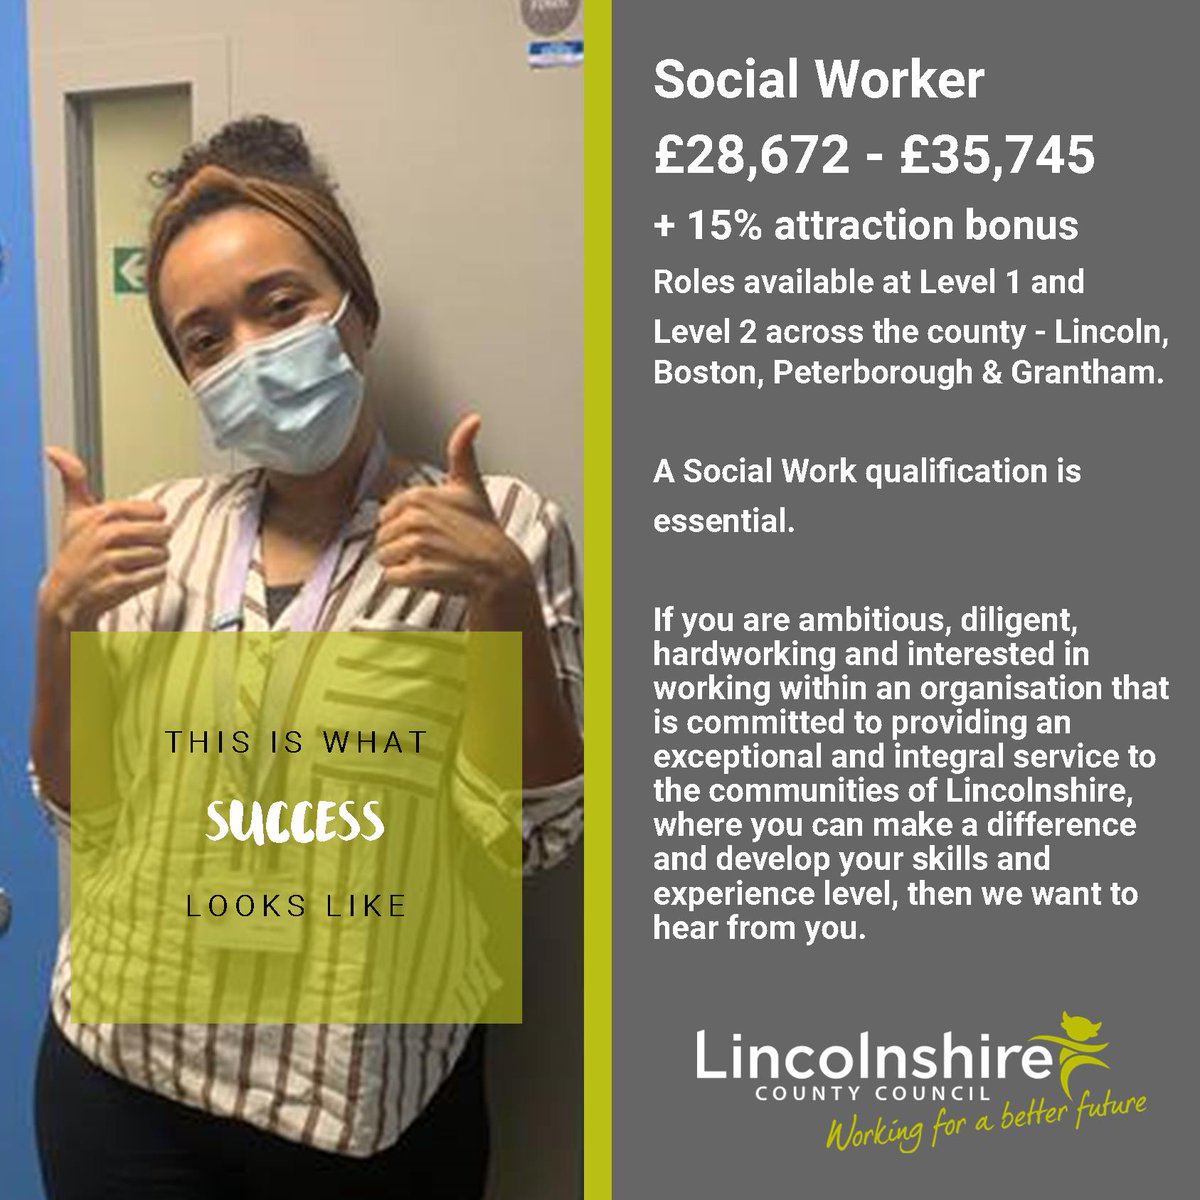 We are recruiting for Social Worker positions across the county. If you want to join our hard working Adult Social Care Hospital Team then take a look at the opportunities on our jobs page: qoo.ly/3aj2b9 #socialcare #socialwork #lincoln #boston #grantham #peterborough